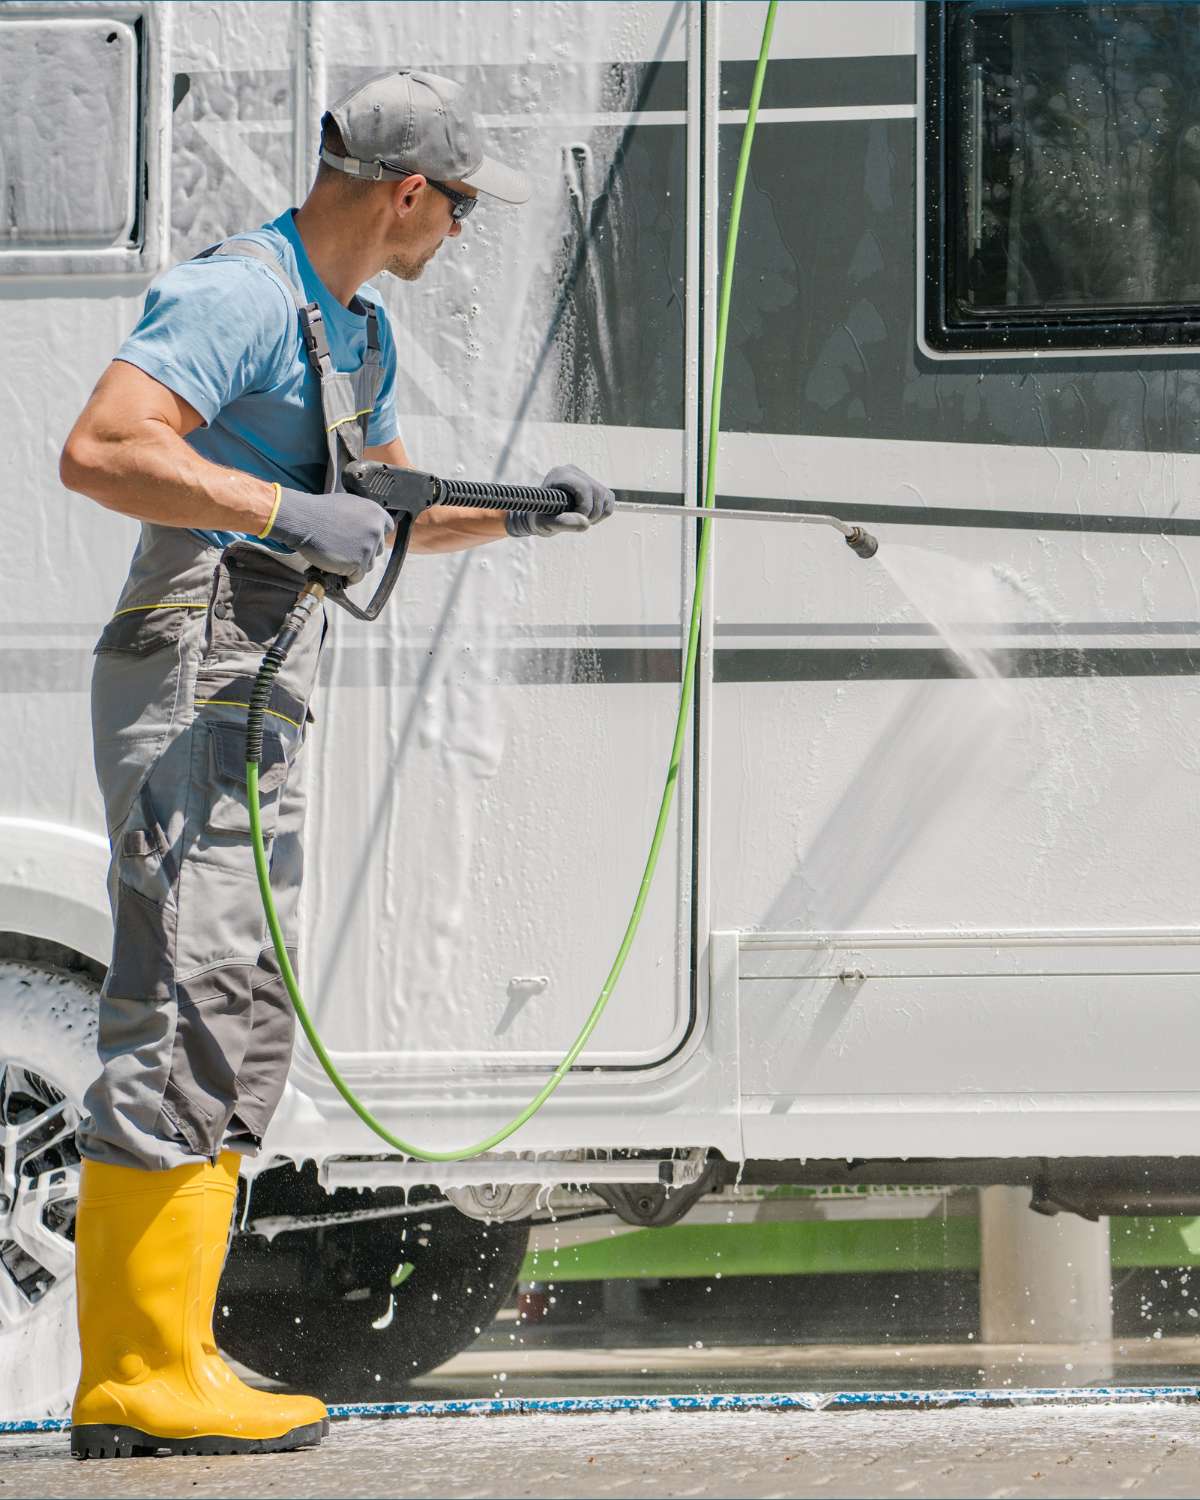 Best RV Cleaning Products